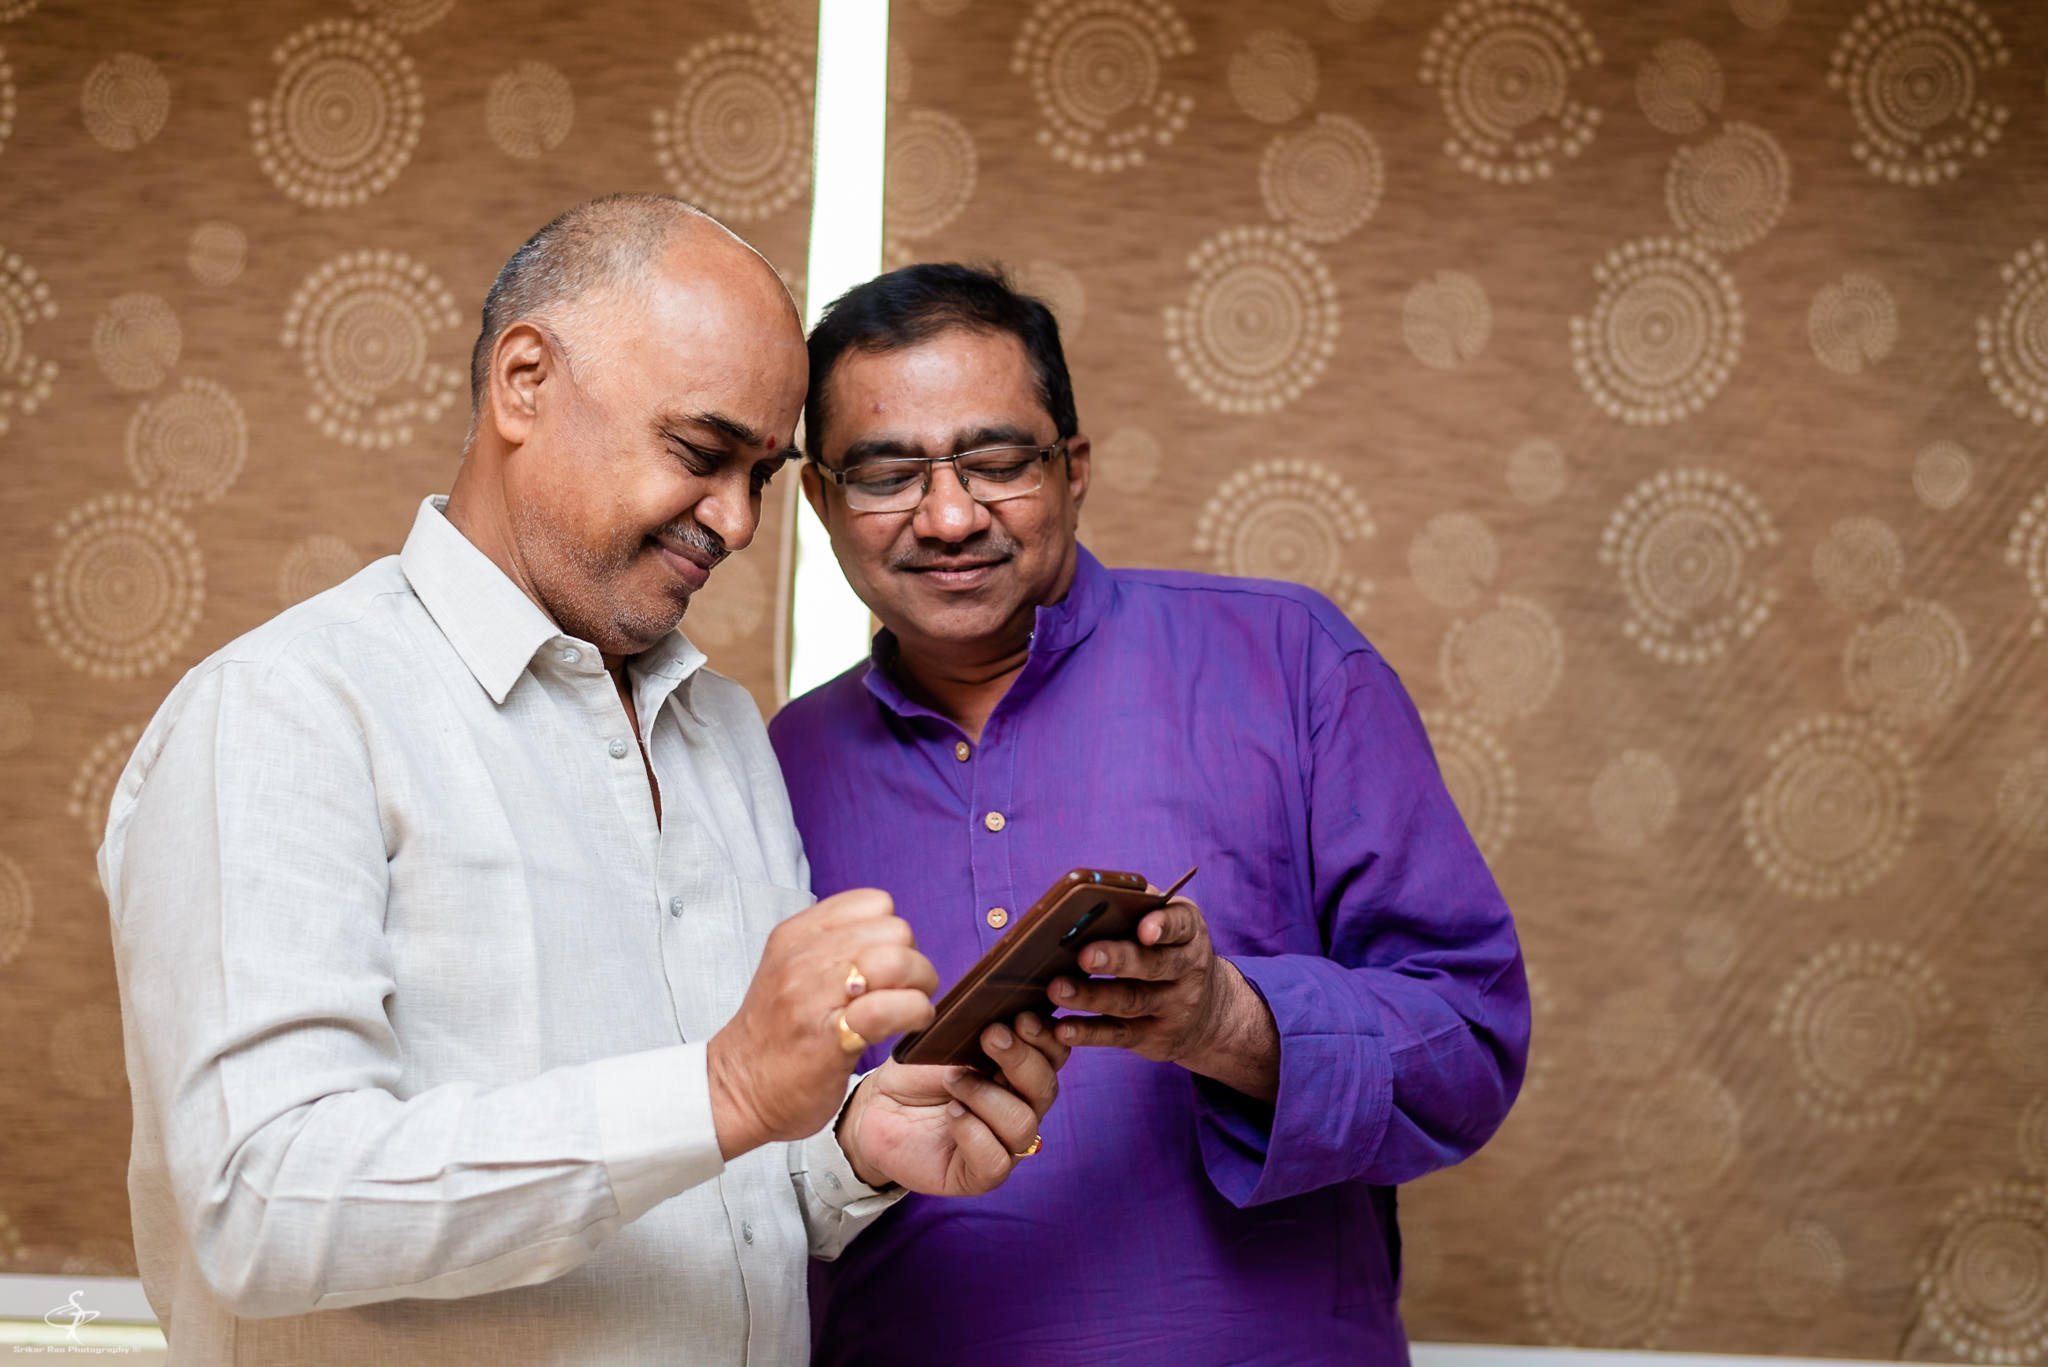 online-home-zoom-hyderabad-ringceremony-photographer--43